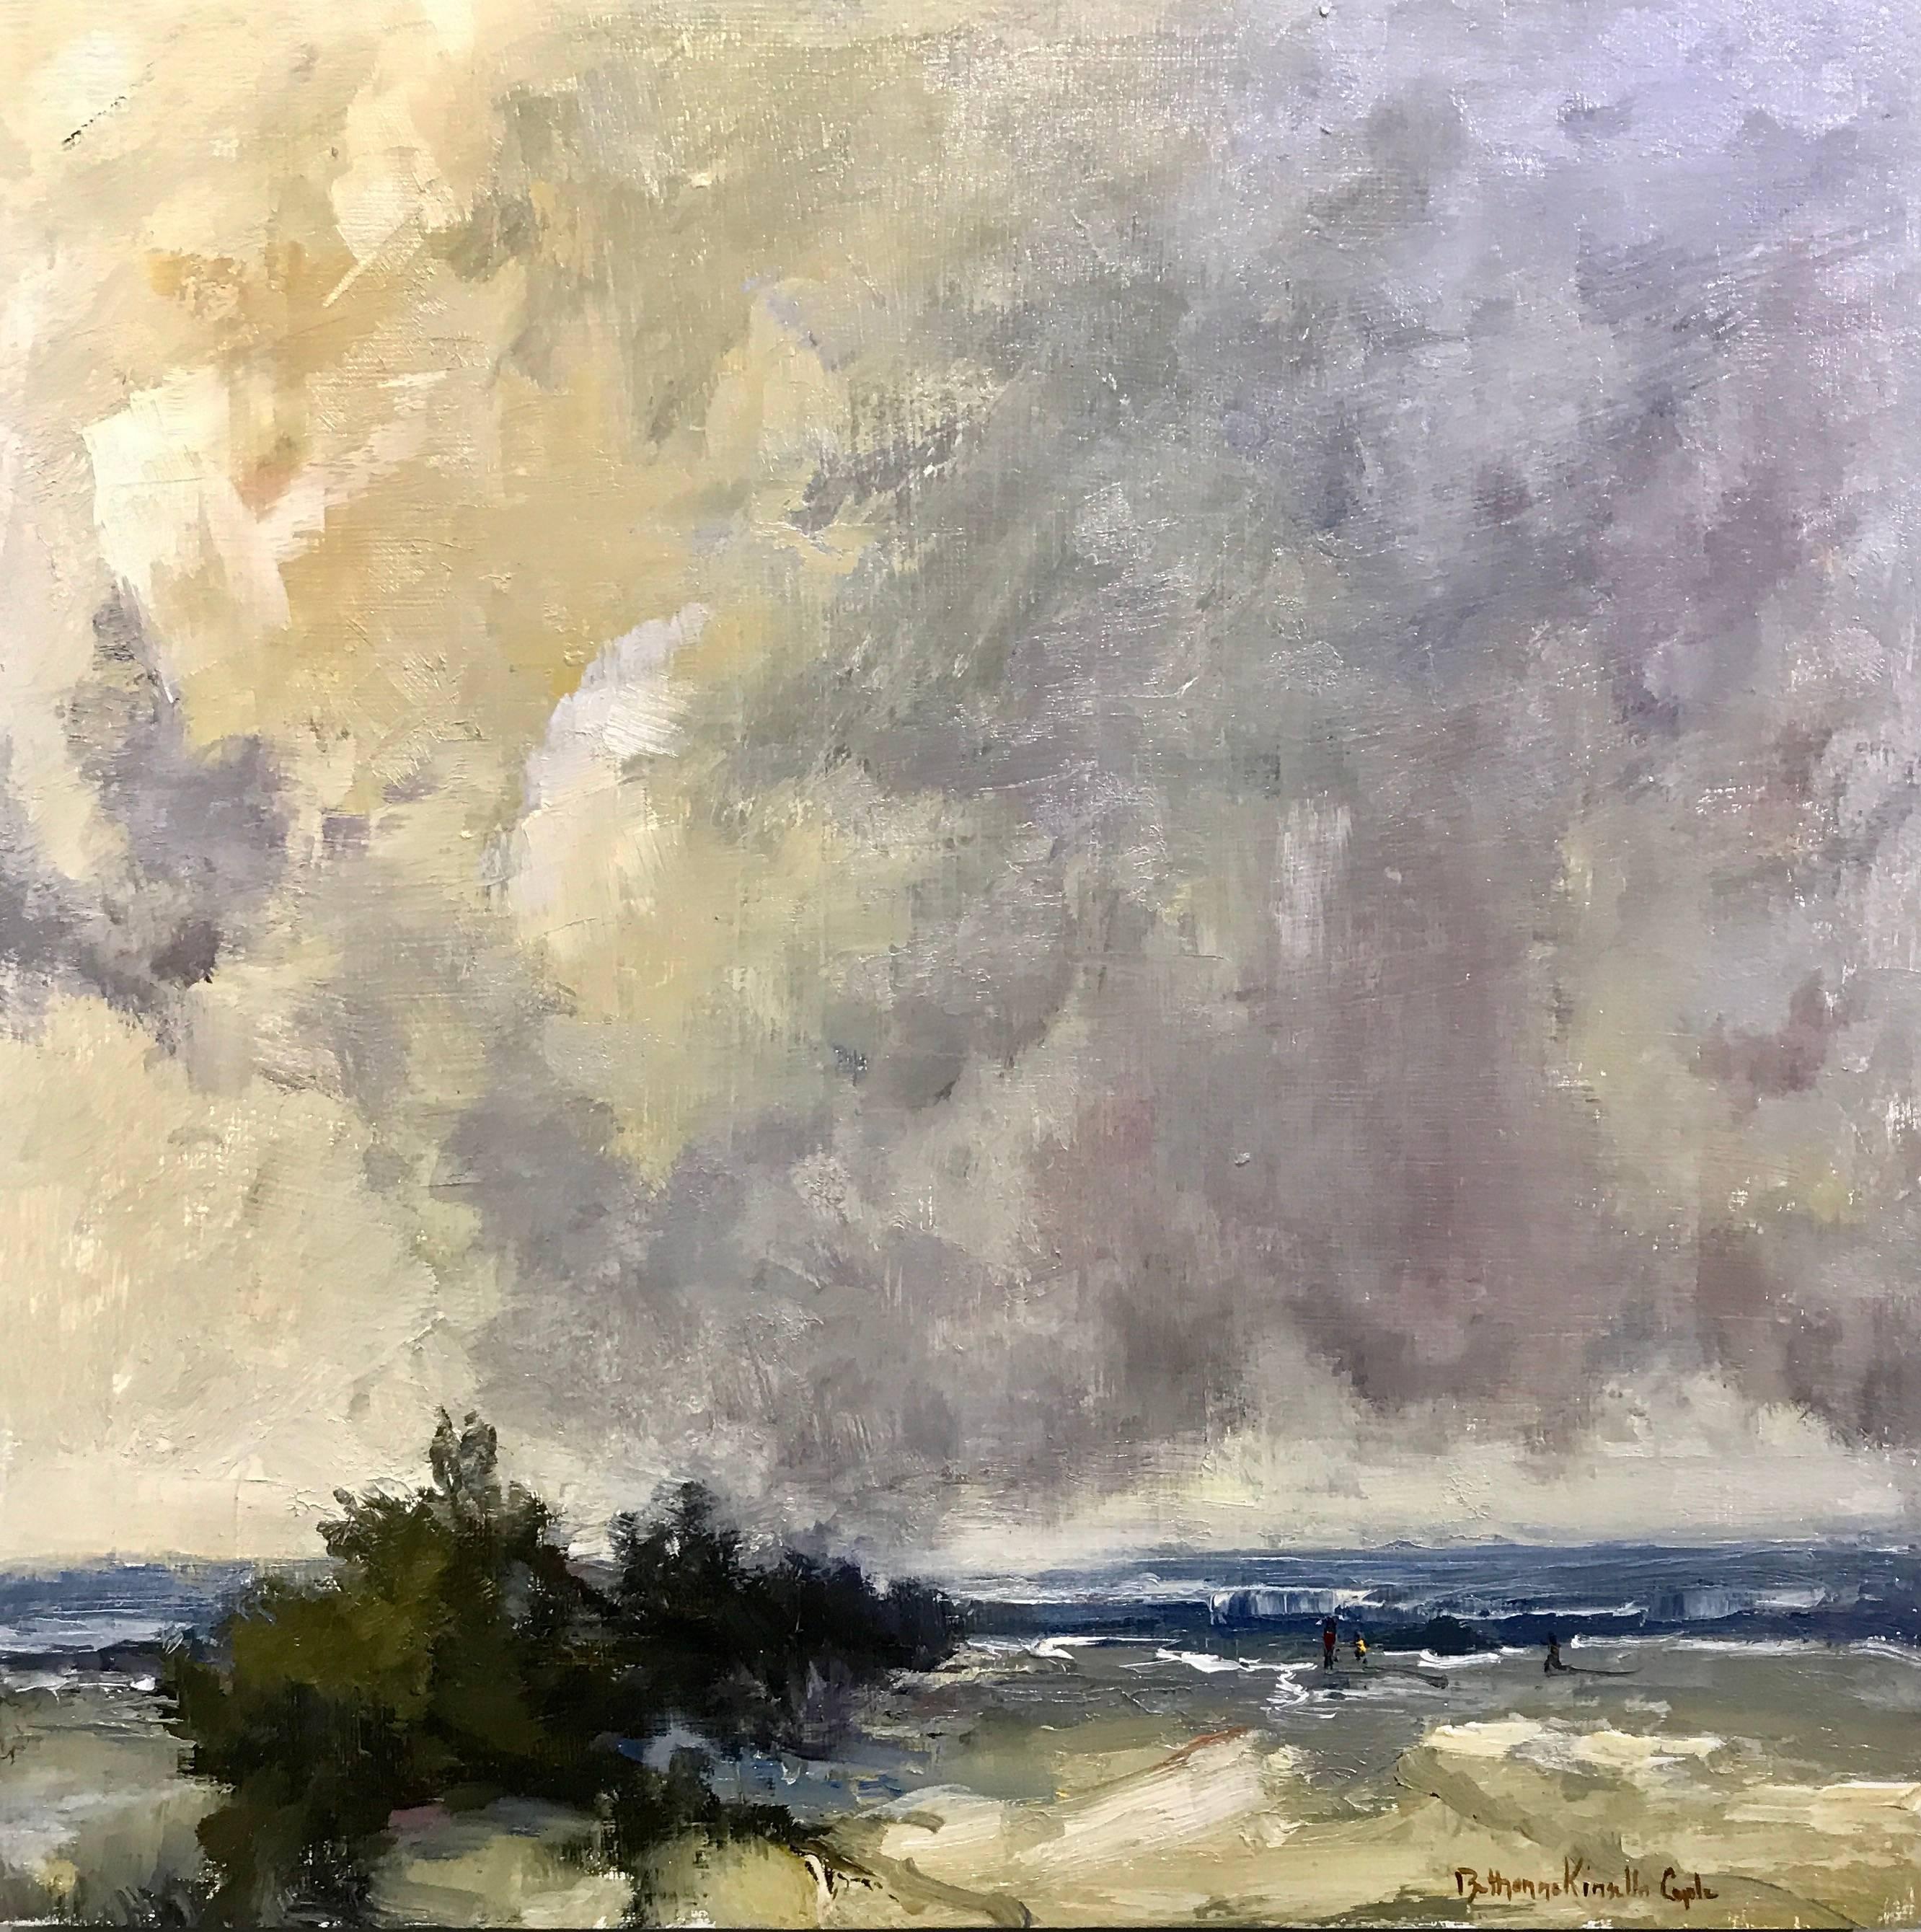 Bethanne Kinsella Cople is a wildly talented and well-know American plein air painter.  She titles her paintings after her favorite poems, this title came from the poem entitled "By The Seaside : The Secret Of The Sea" by Henry Wadsworth Longfellow.